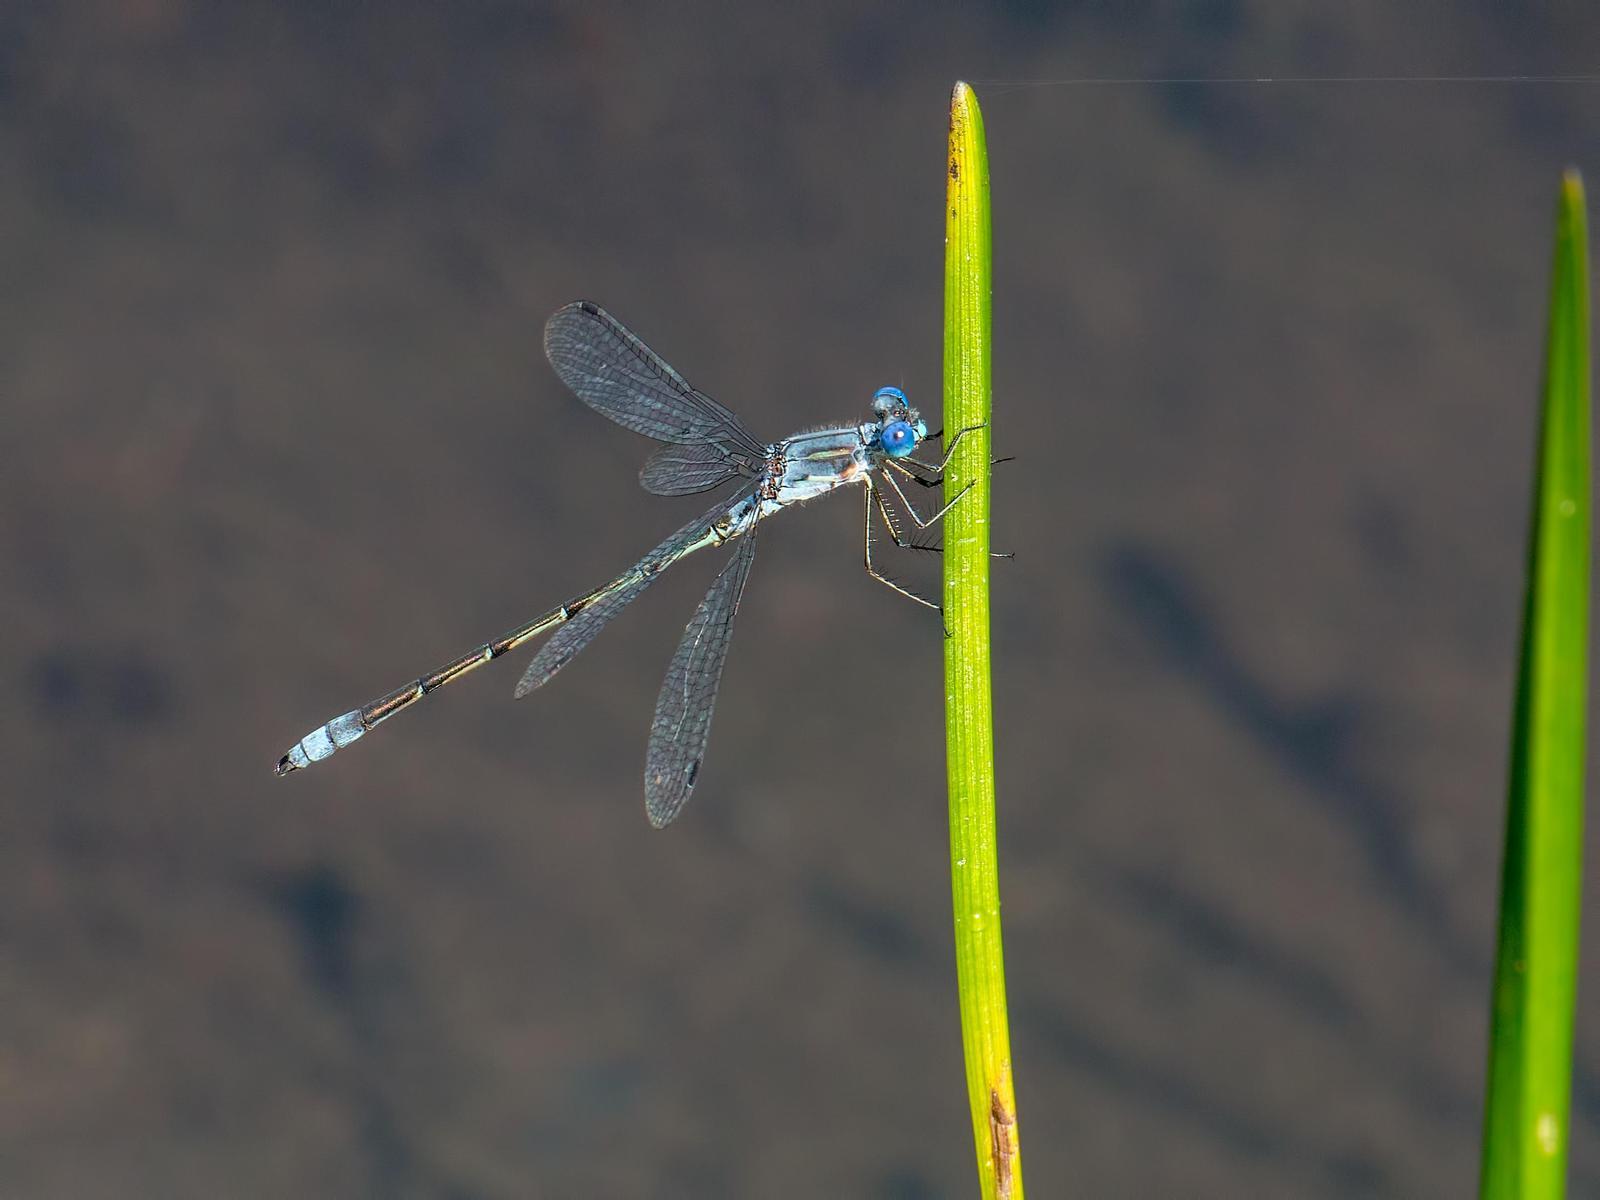 Northern Spreadwing Photo by Michael Moore